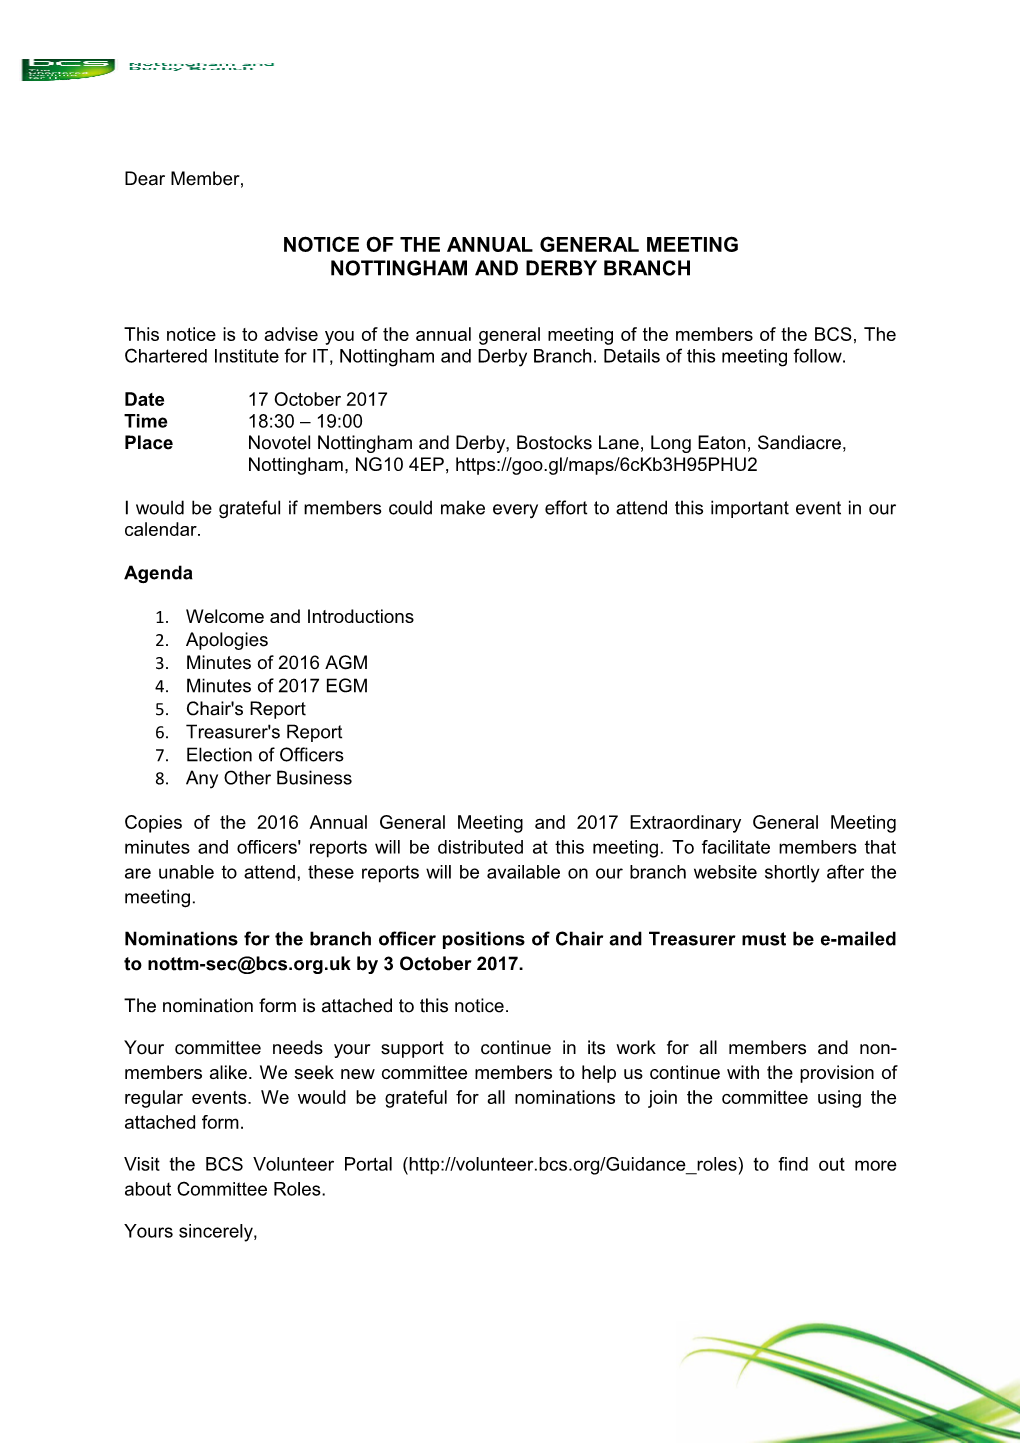 Notice of the Annual General Meeting Nottingham and Derby Branch